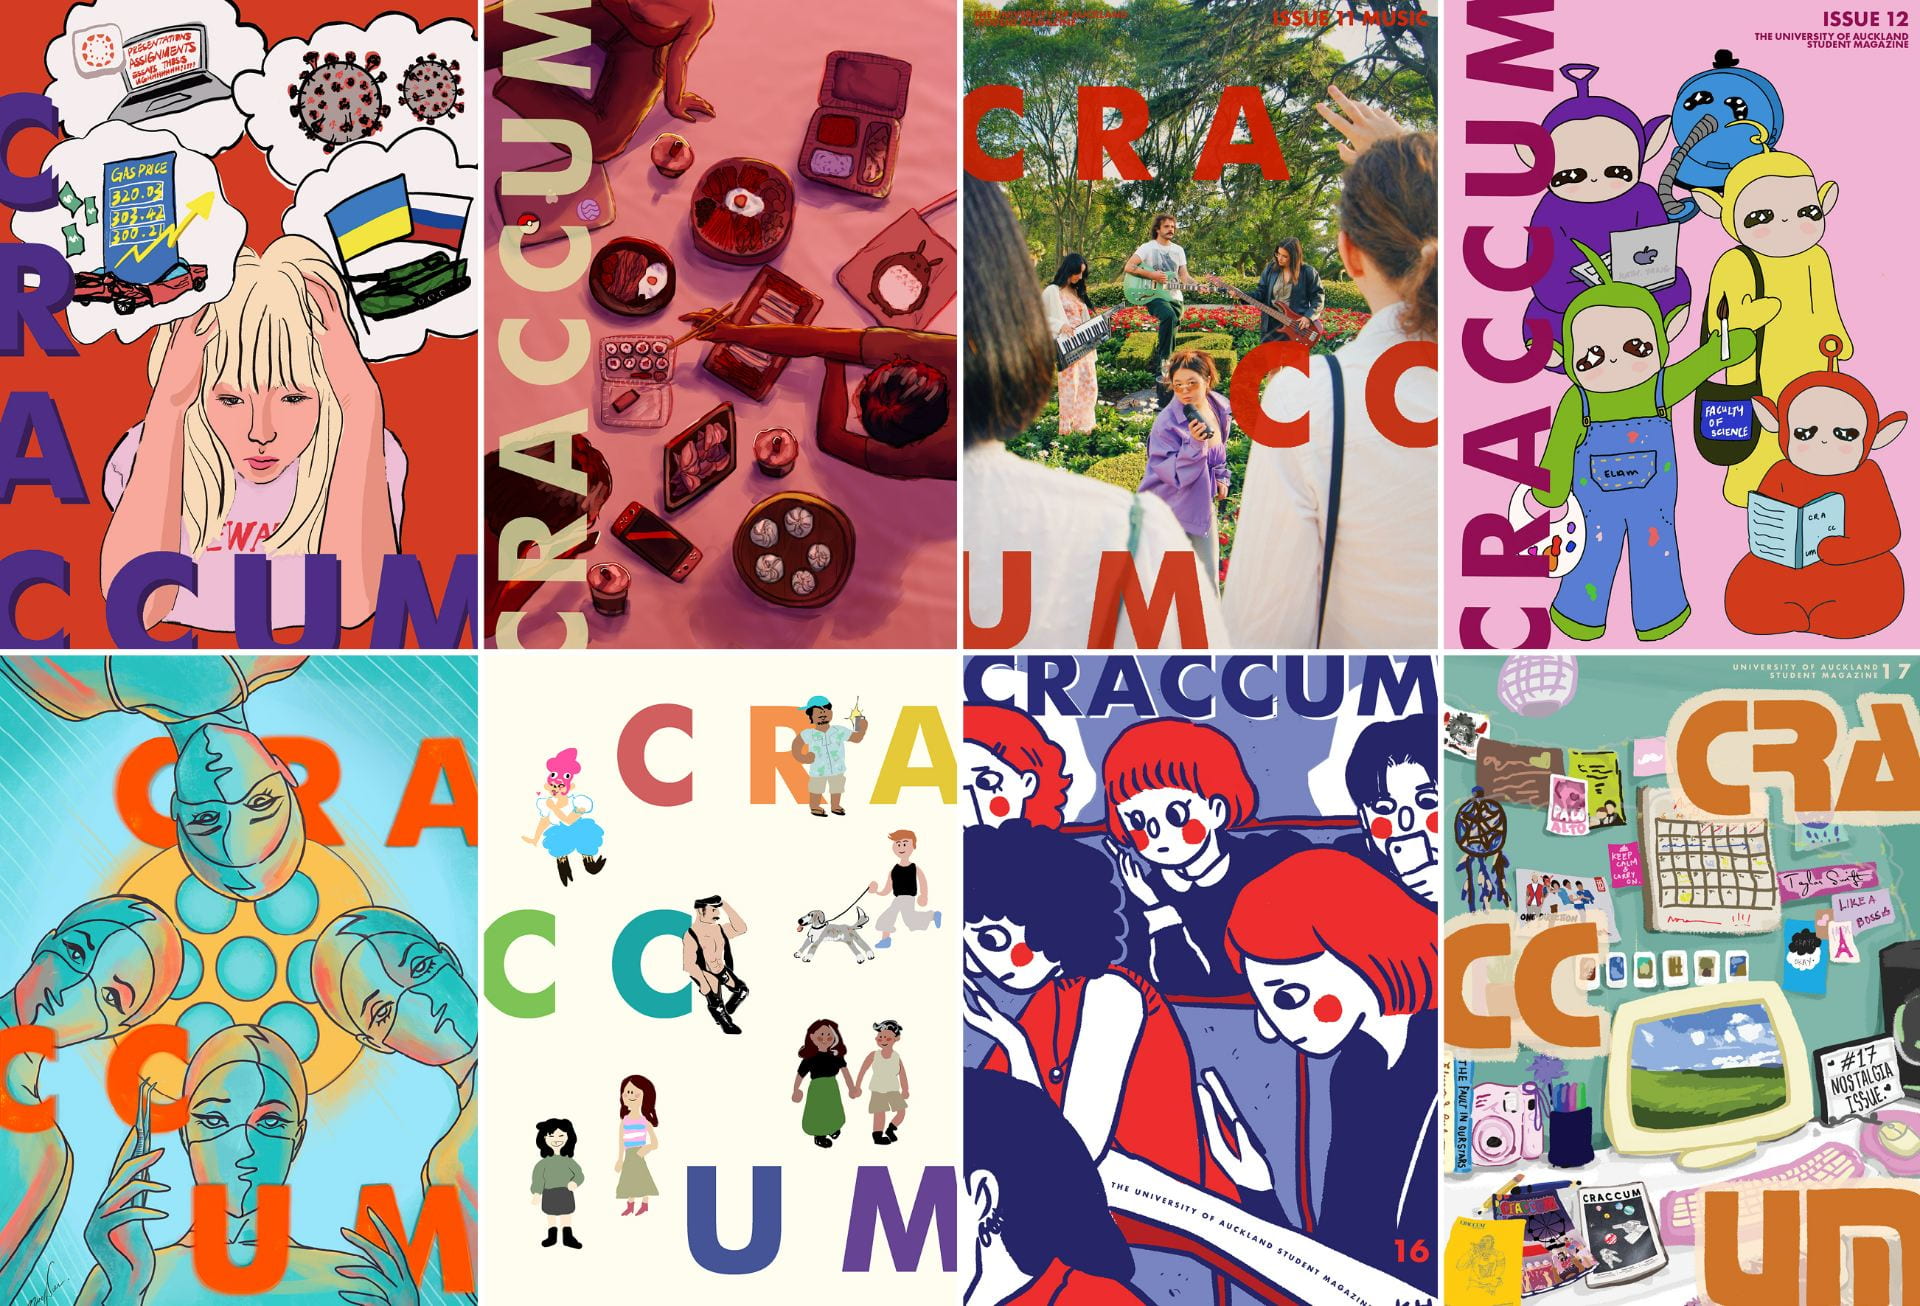 A selection of 2020 Craccum Magazine covers